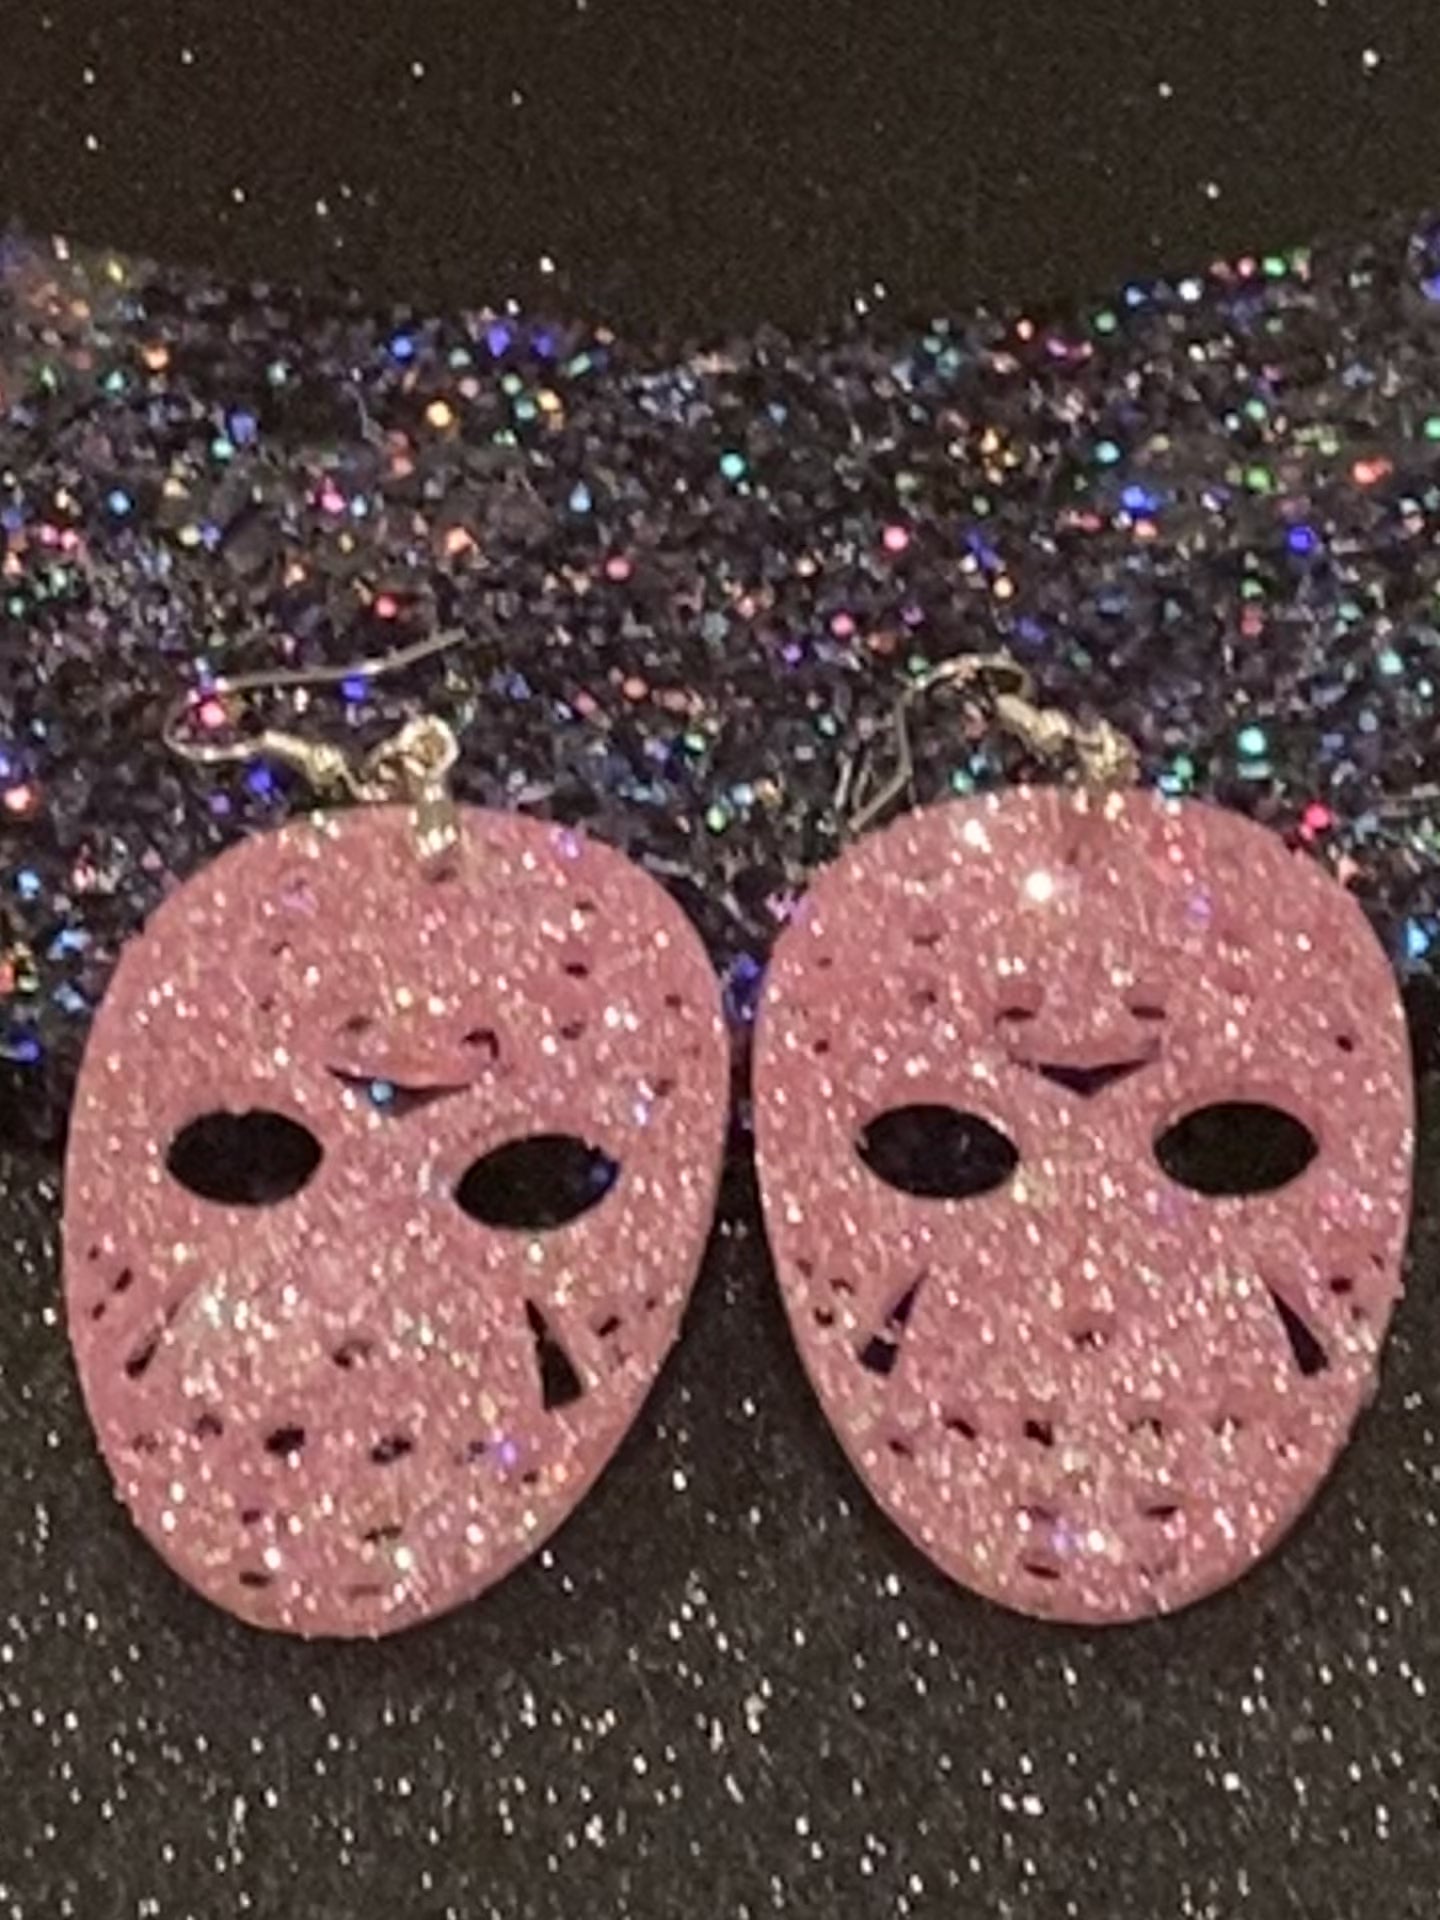 Pretty in Pink Killer, knife earrings, laser cut acrylic, charms, past –  Sparkle Monster